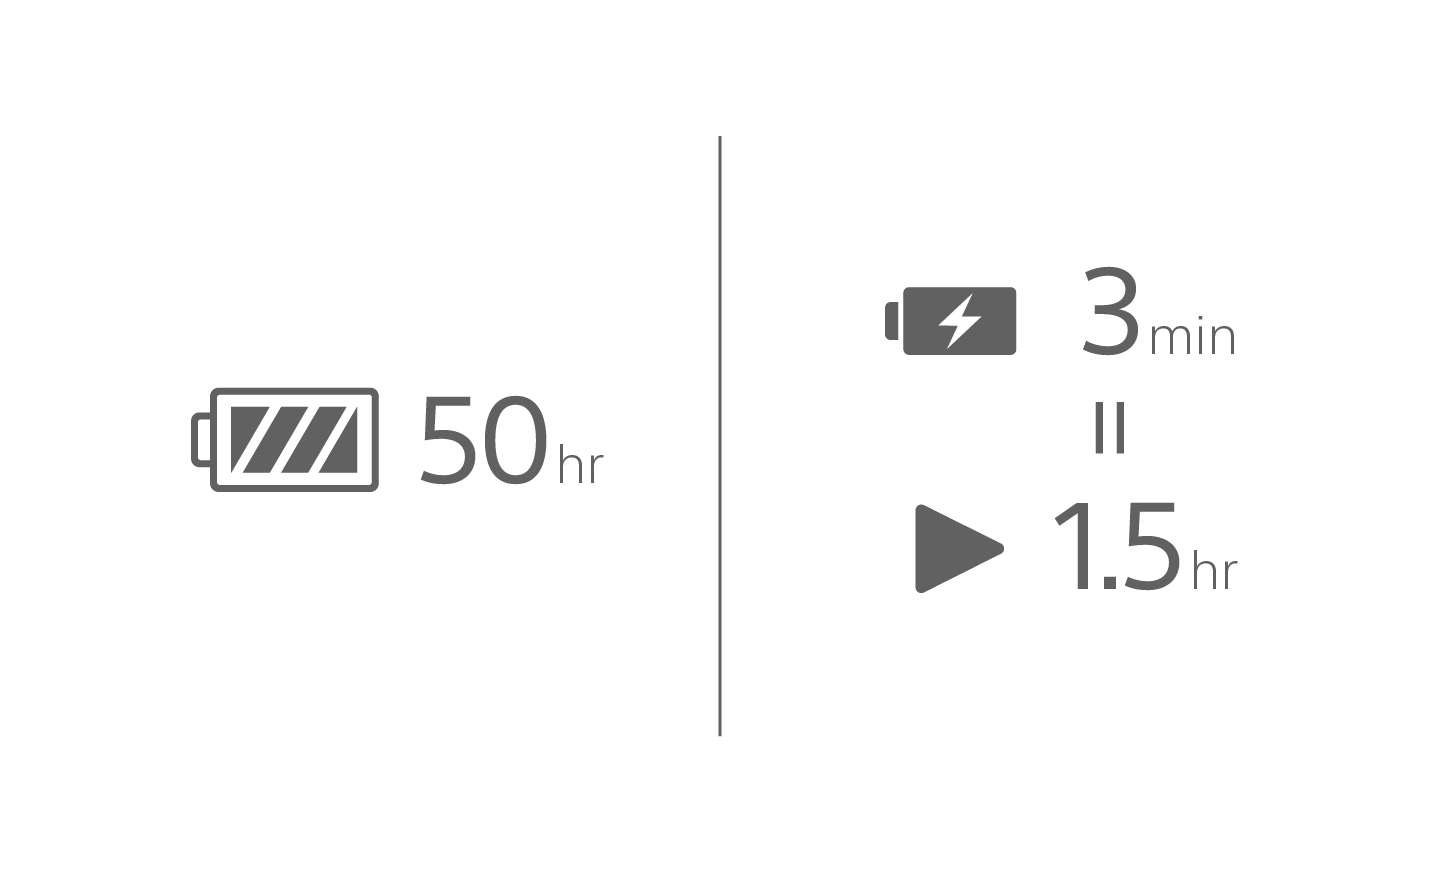 Image of a battery icon with 50 hr text, a charging battery icon with 3 min text above a play icon with 1.5 hr text